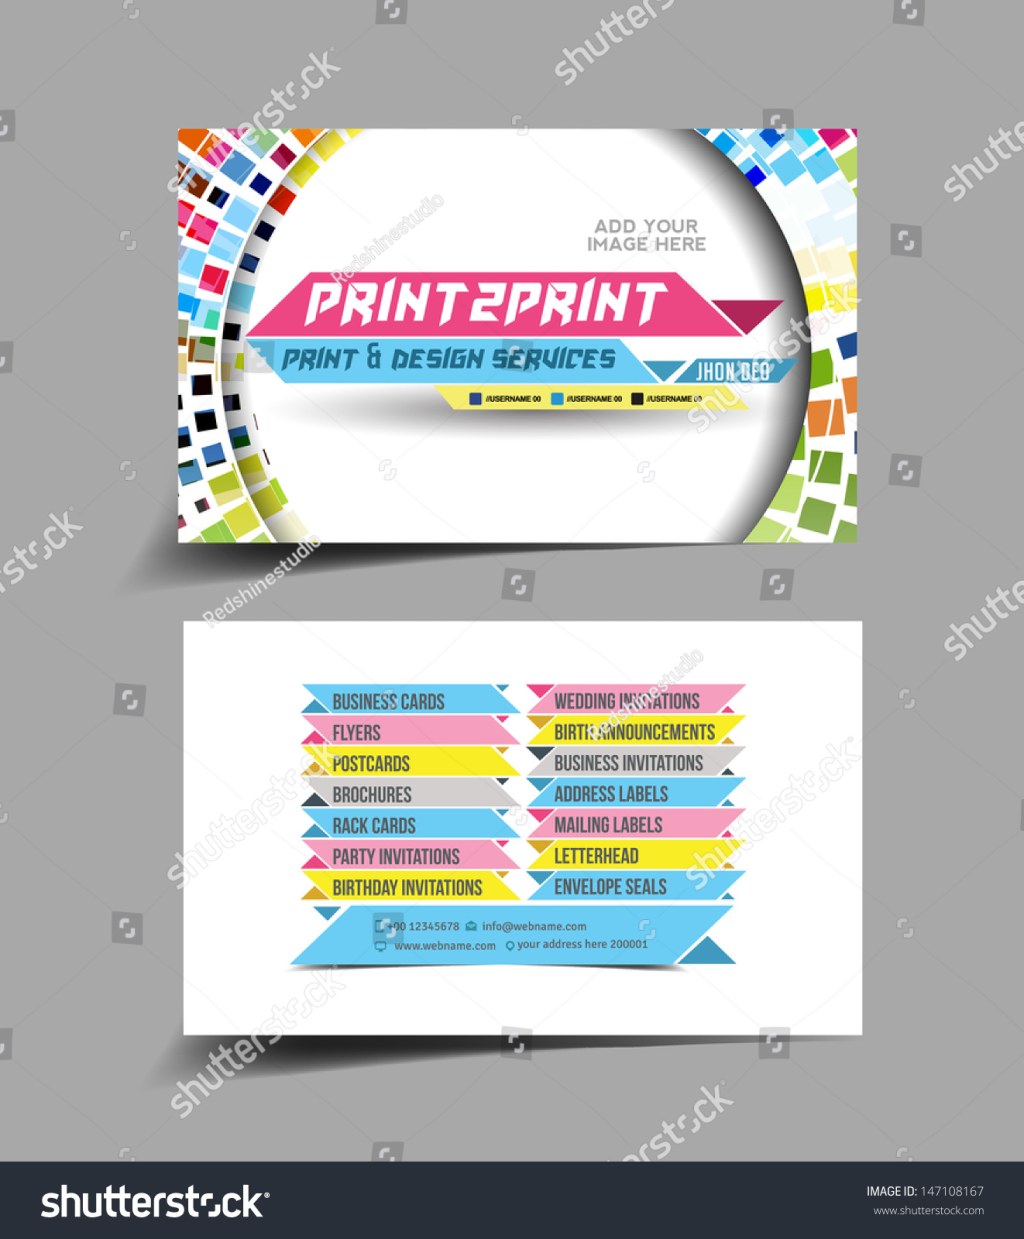 printing press business cards images stock photos amp vectors 1